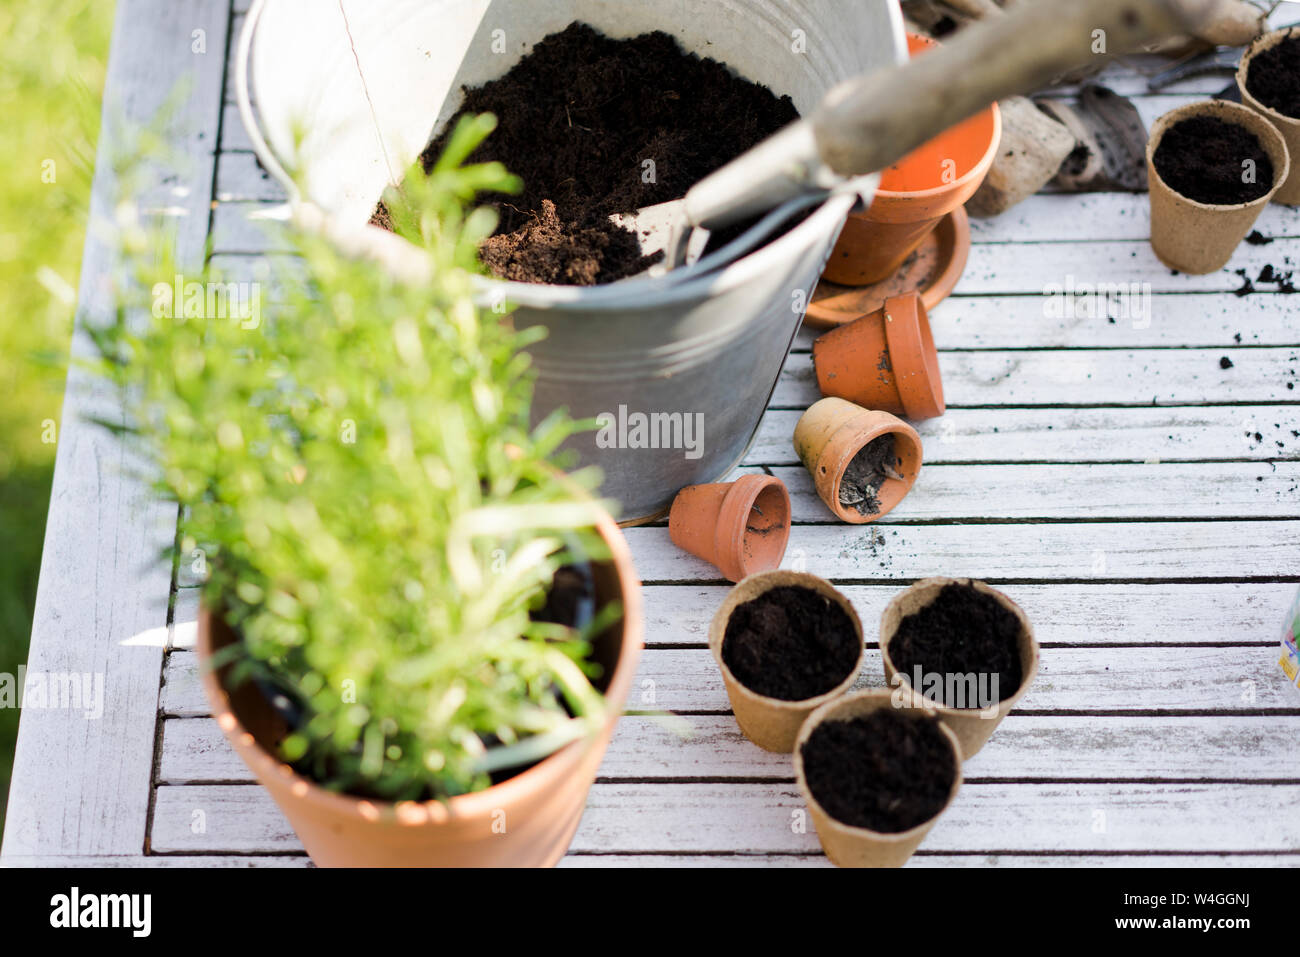 Gardening accessories on table Stock Photo